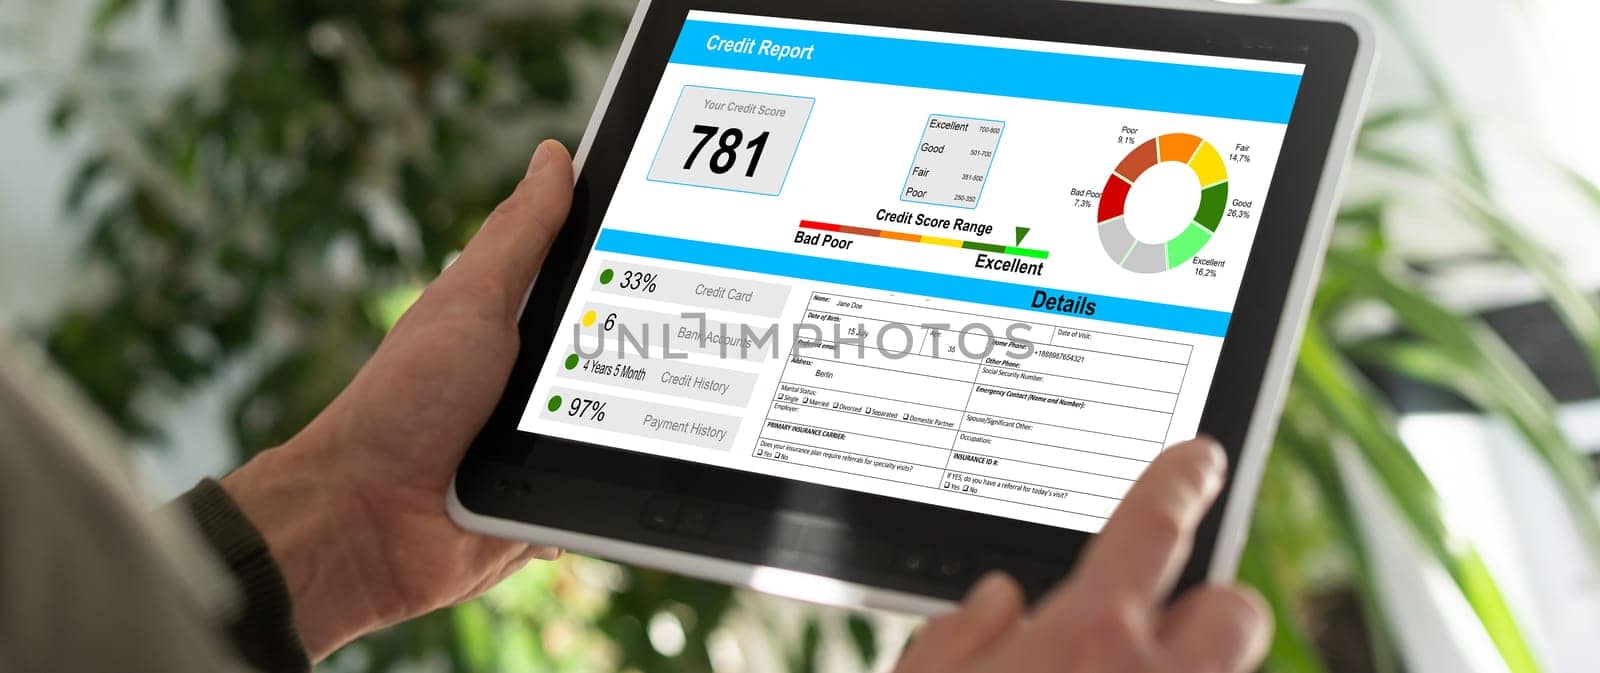 report credit score banking borrowing application risk form document loan business market policy deployment data check workplace concept - stock image by Andelov13